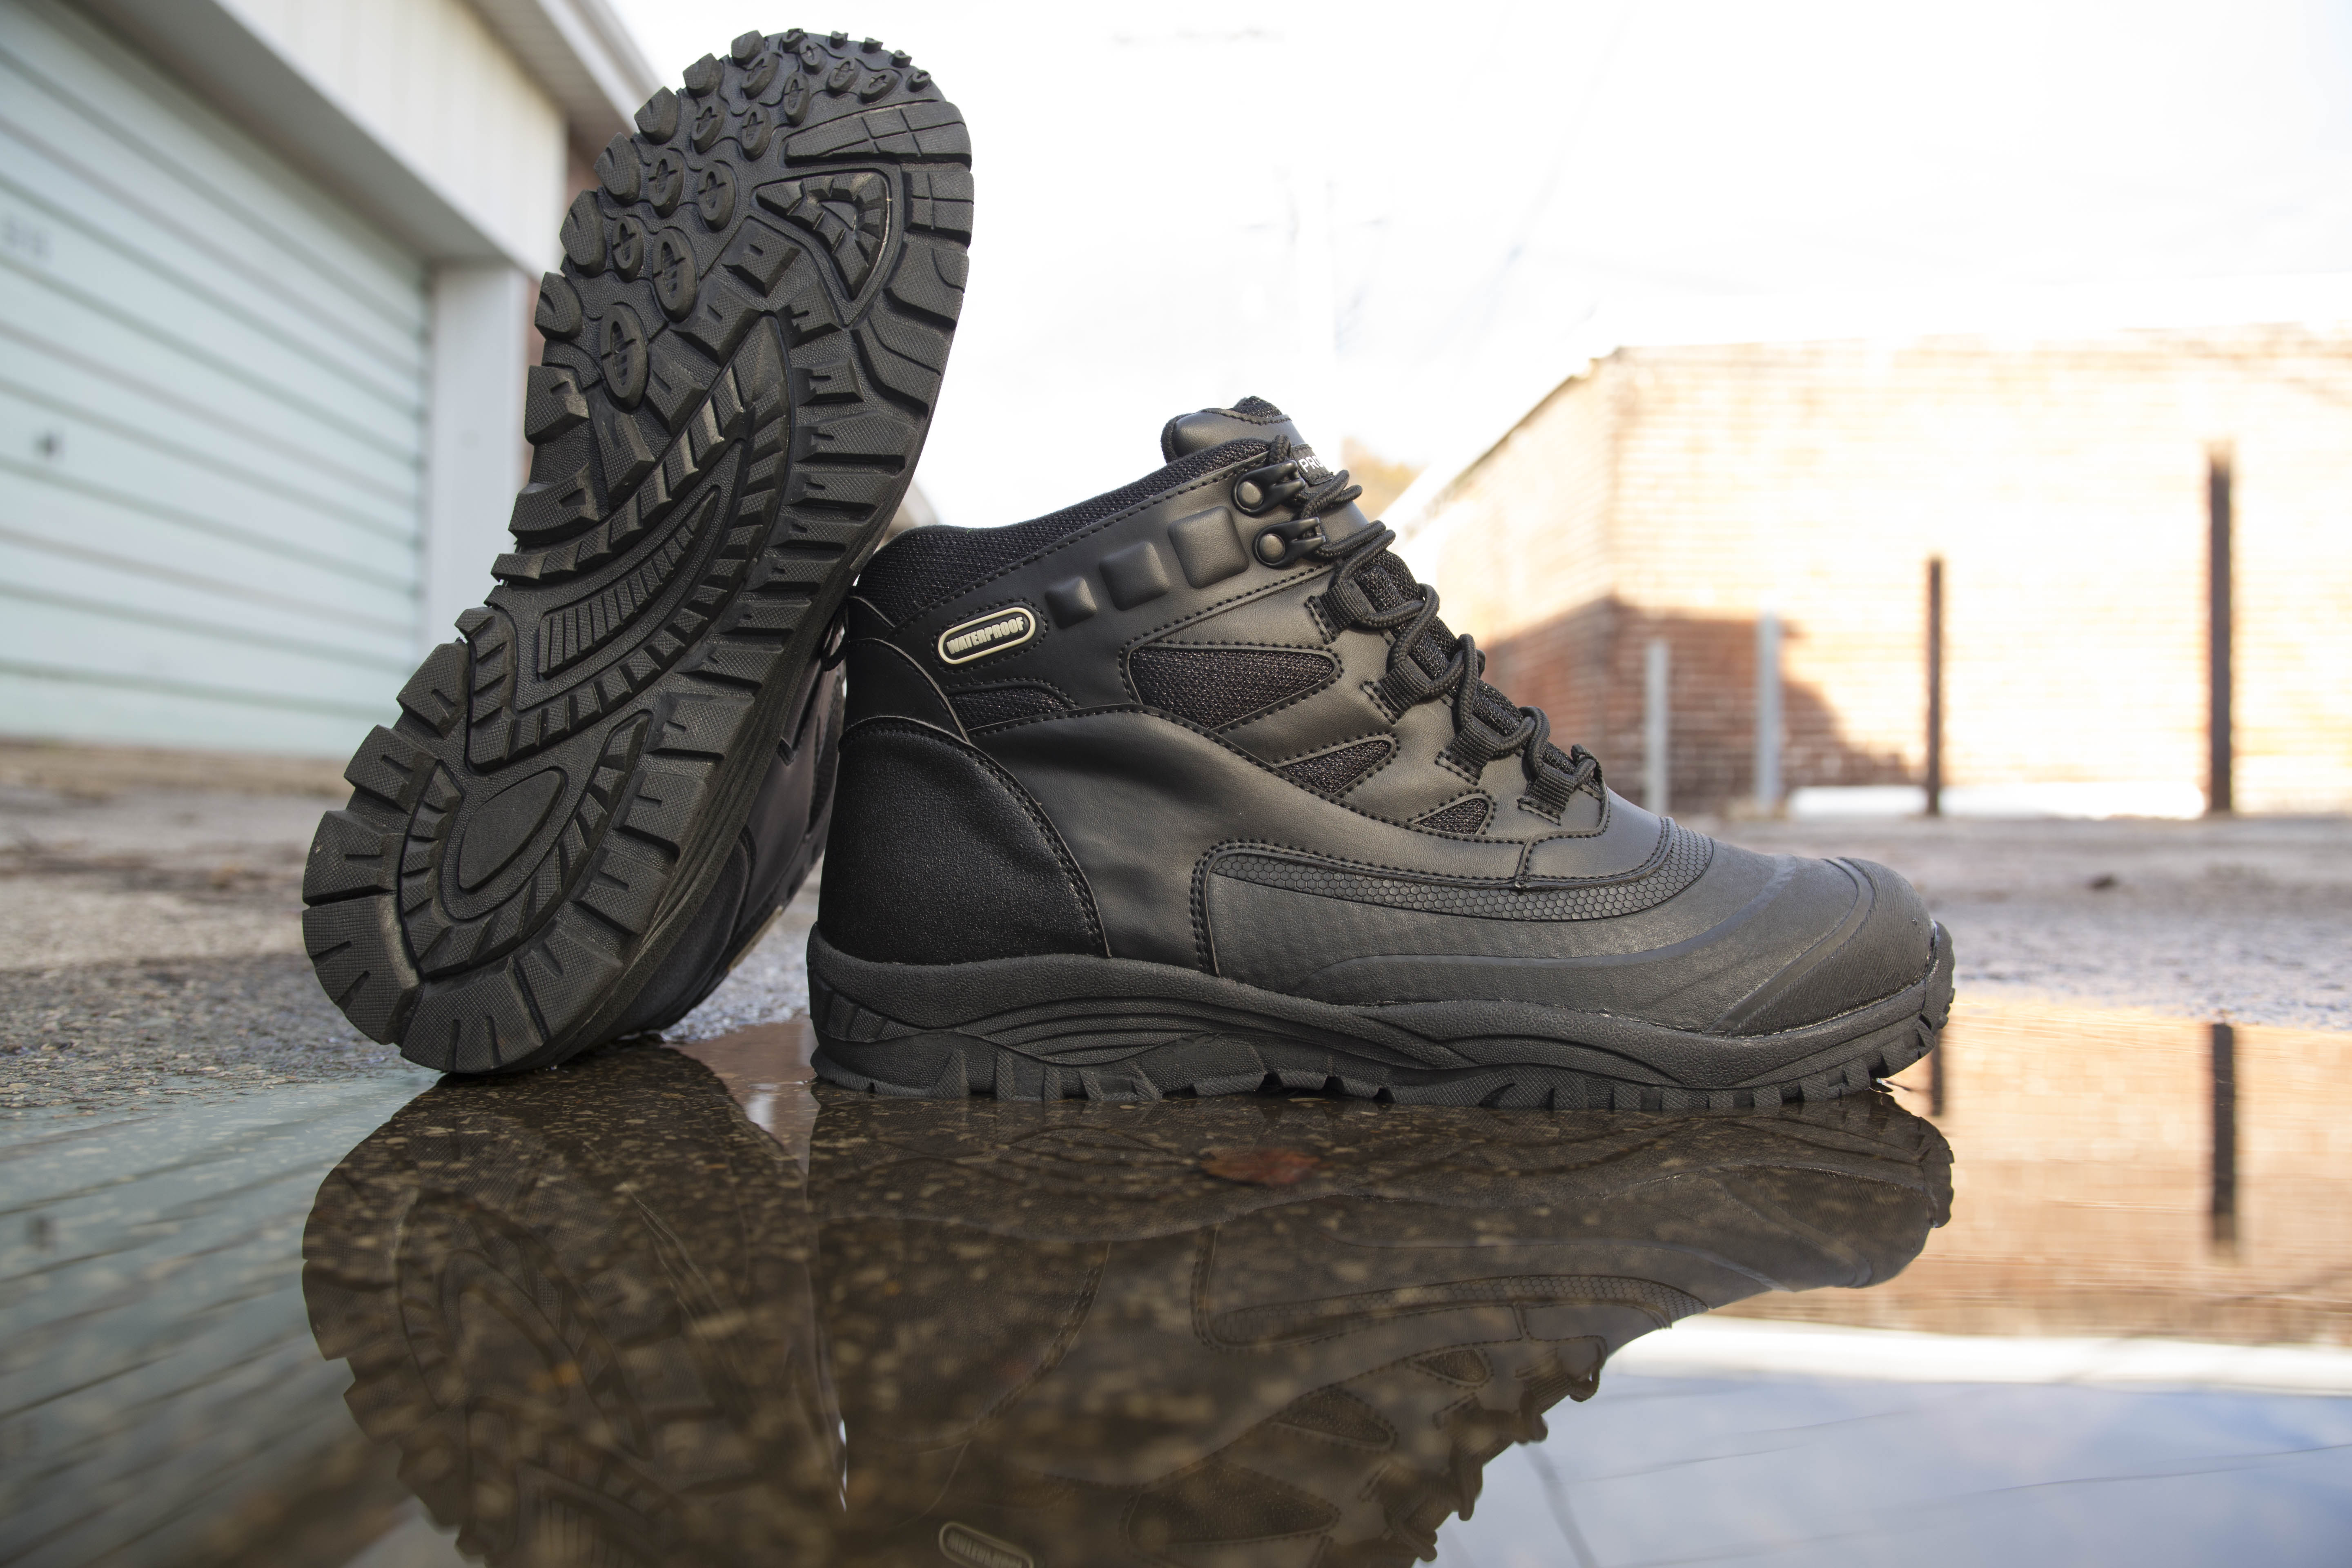 Durable comfort and versatility are the trademarks of the WPX waterproof crossover tactical boot.